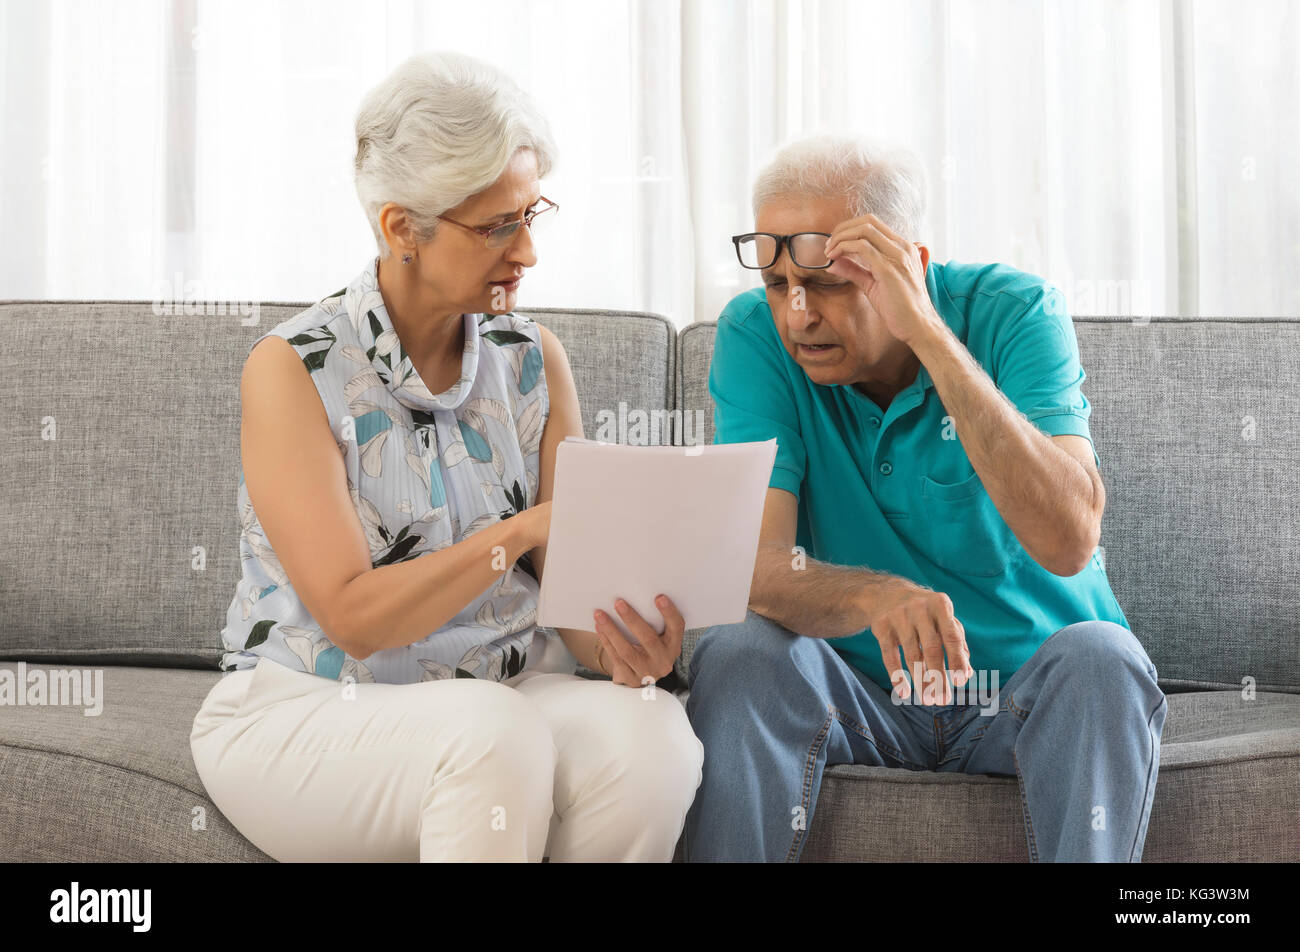 A Senior couple sitting on sofa document Banque D'Images